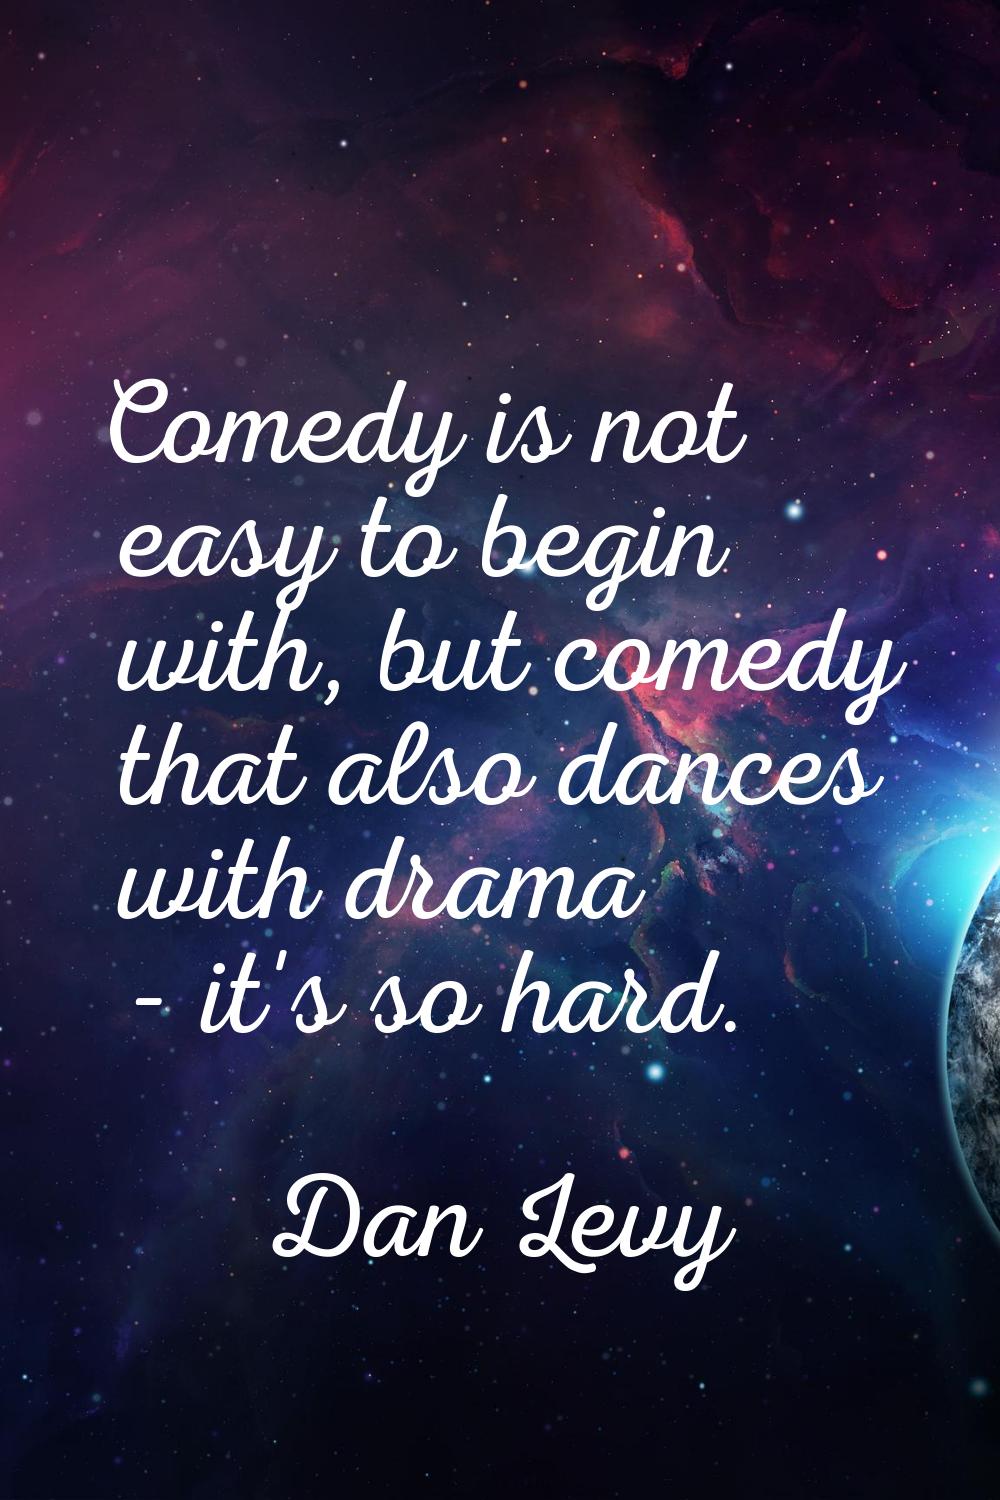 Comedy is not easy to begin with, but comedy that also dances with drama - it's so hard.